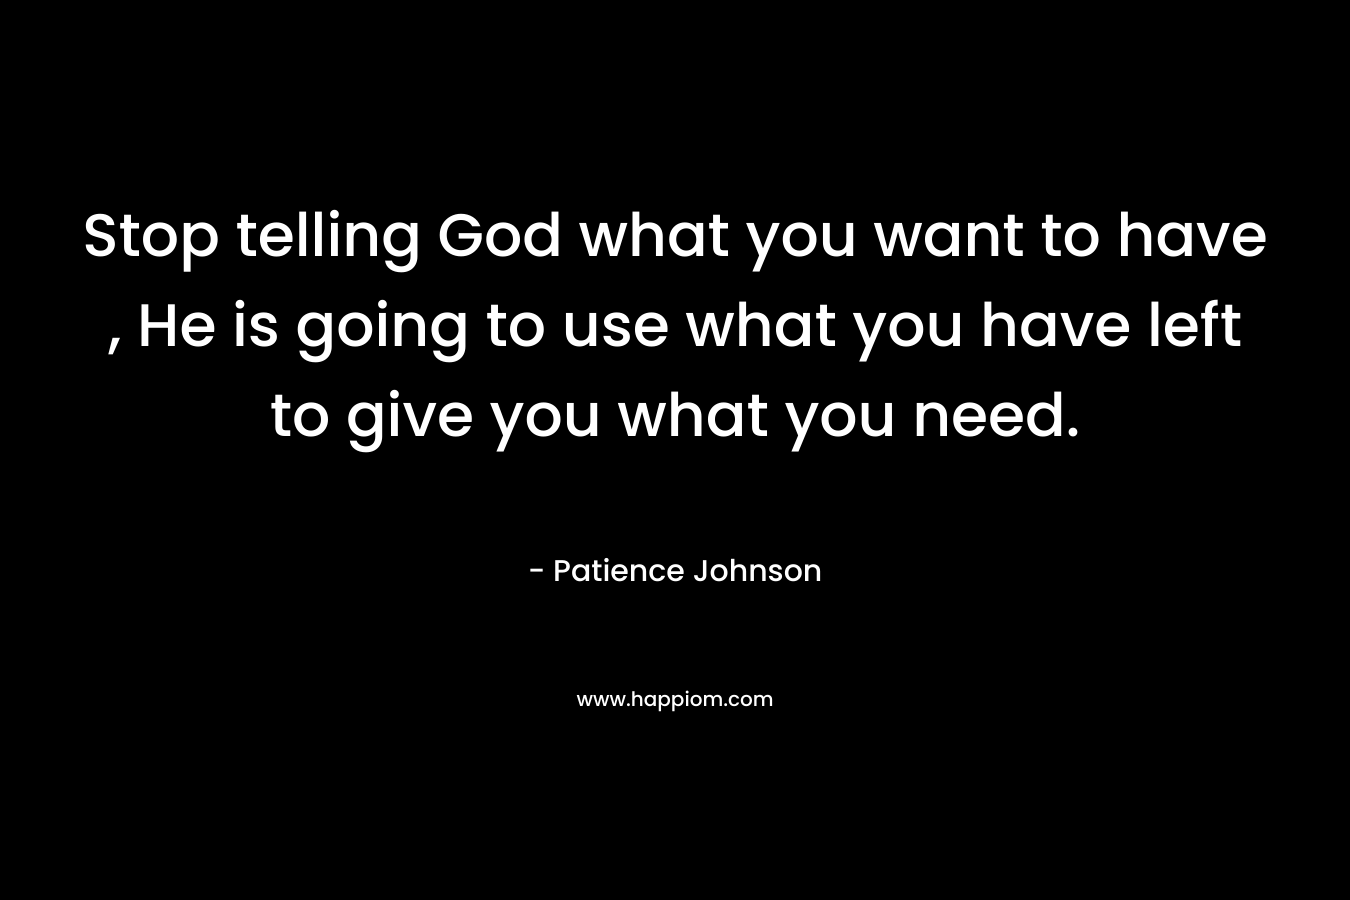 Stop telling God what you want to have , He is going to use what you have left to give you what you need.